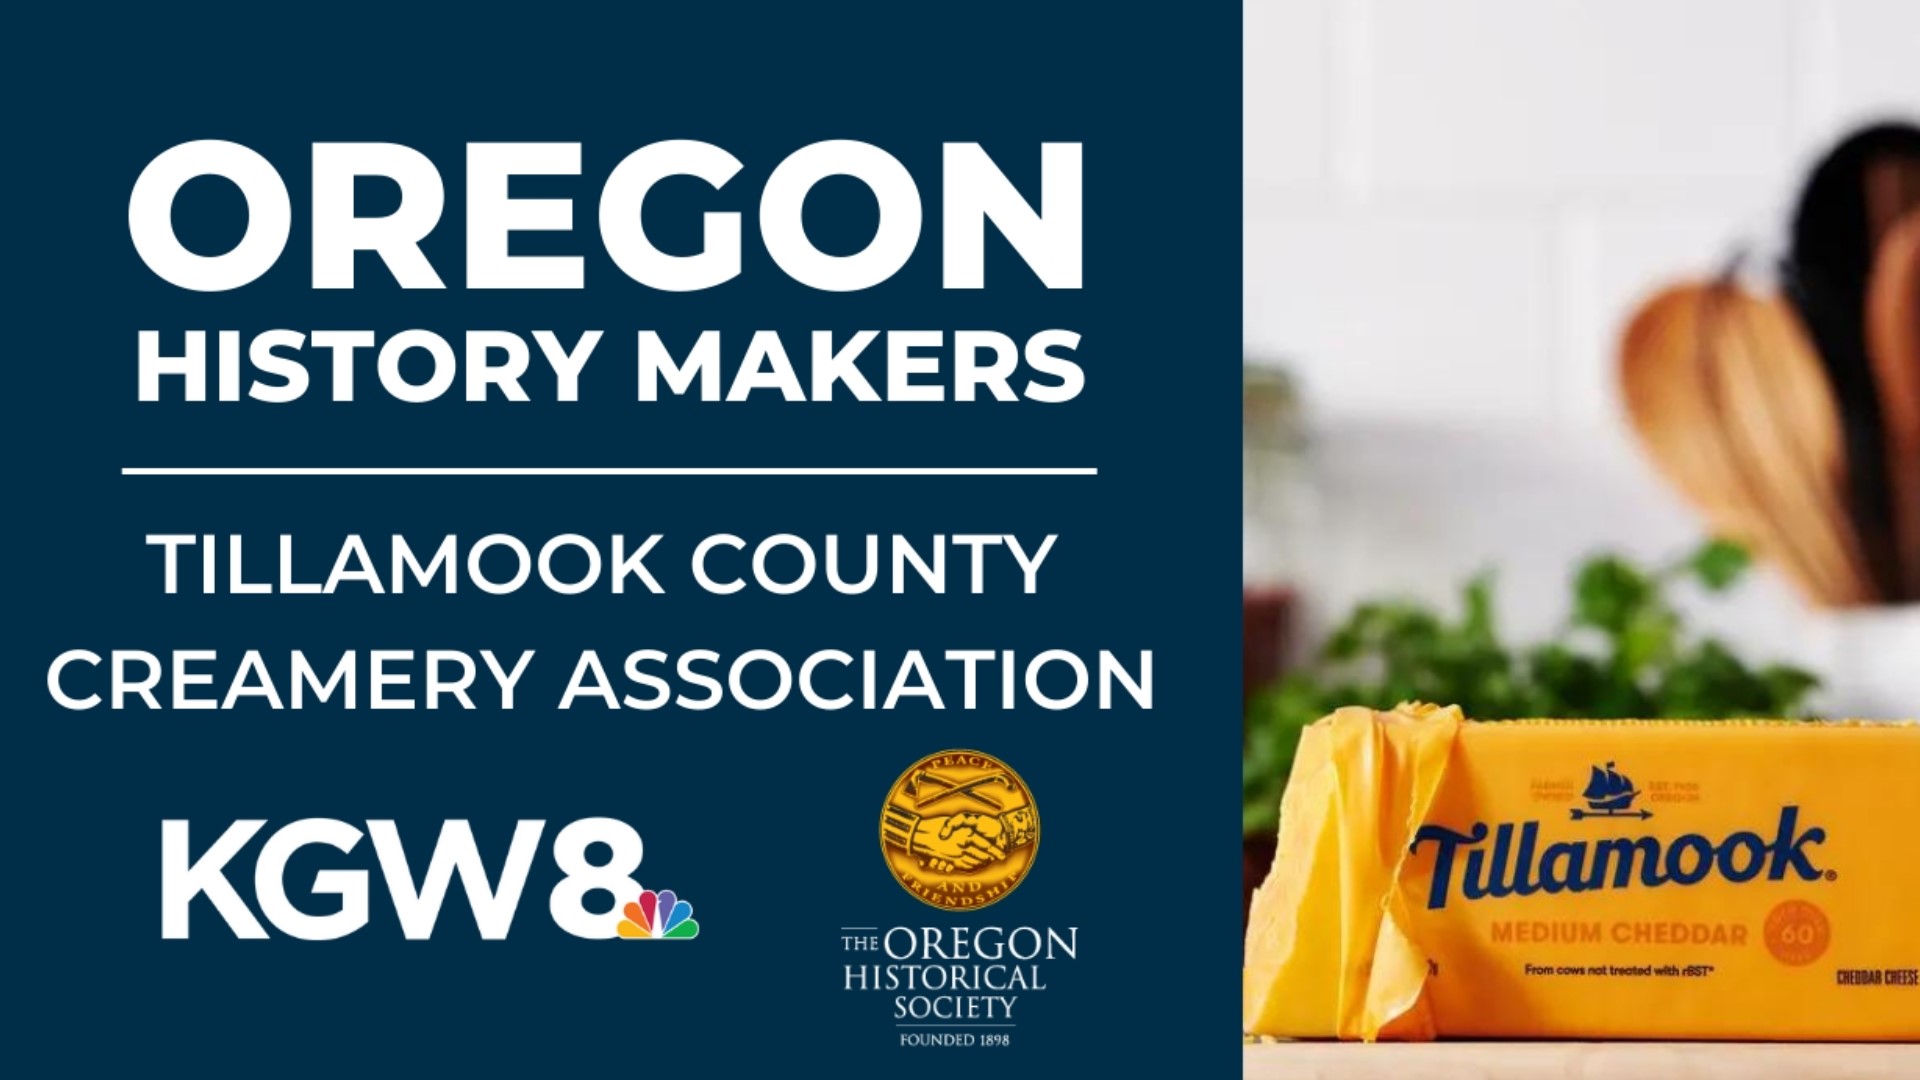 Tillamook operates production facilities in both Tillamook and Boardman, employing more than 900 people throughout Oregon. It recently exceeded $1B in retail sales.